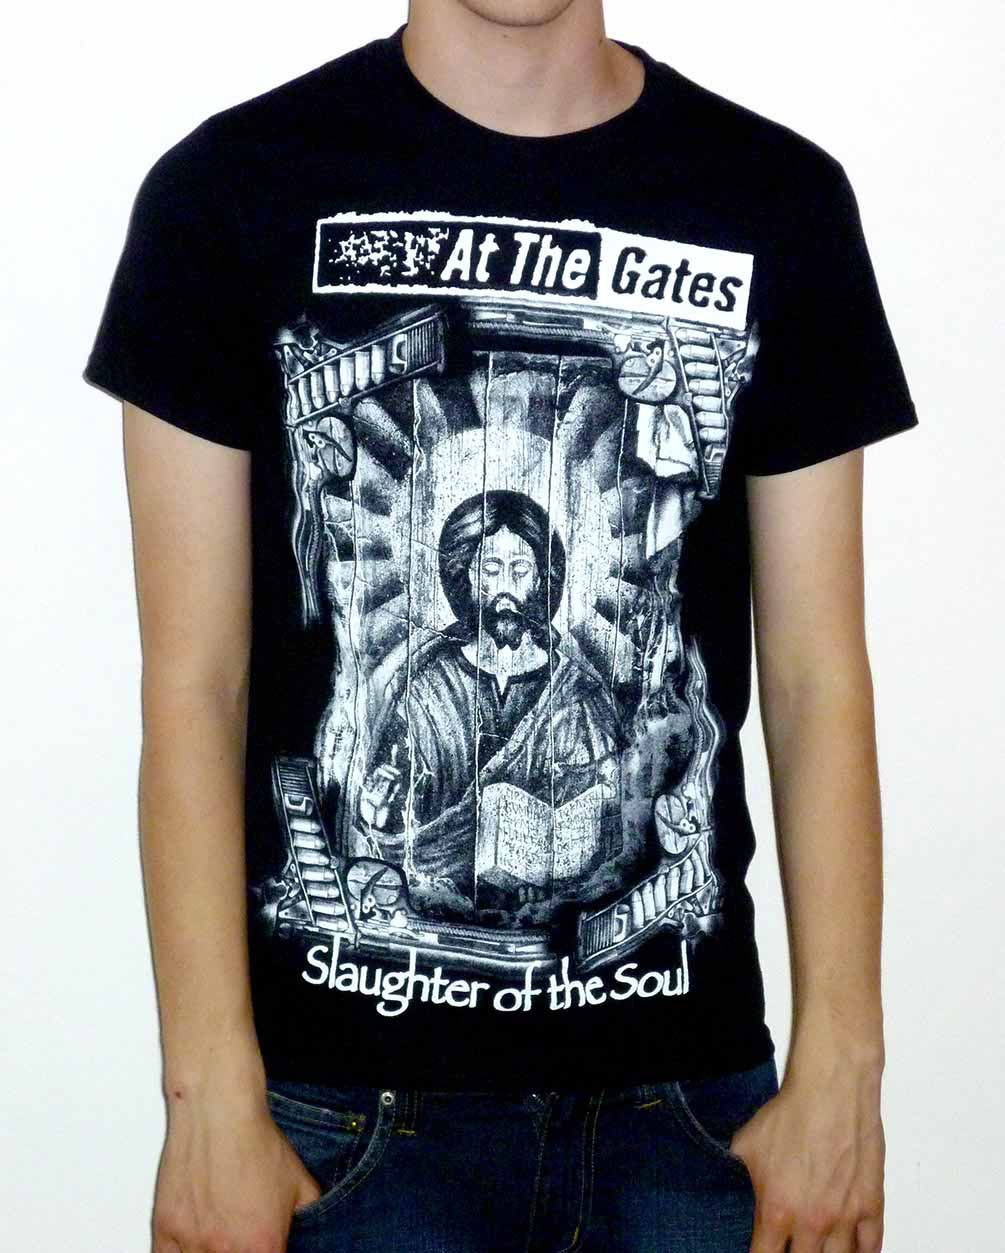 At The Gates "Slaughter Of The Soul" Vintage T-shirt